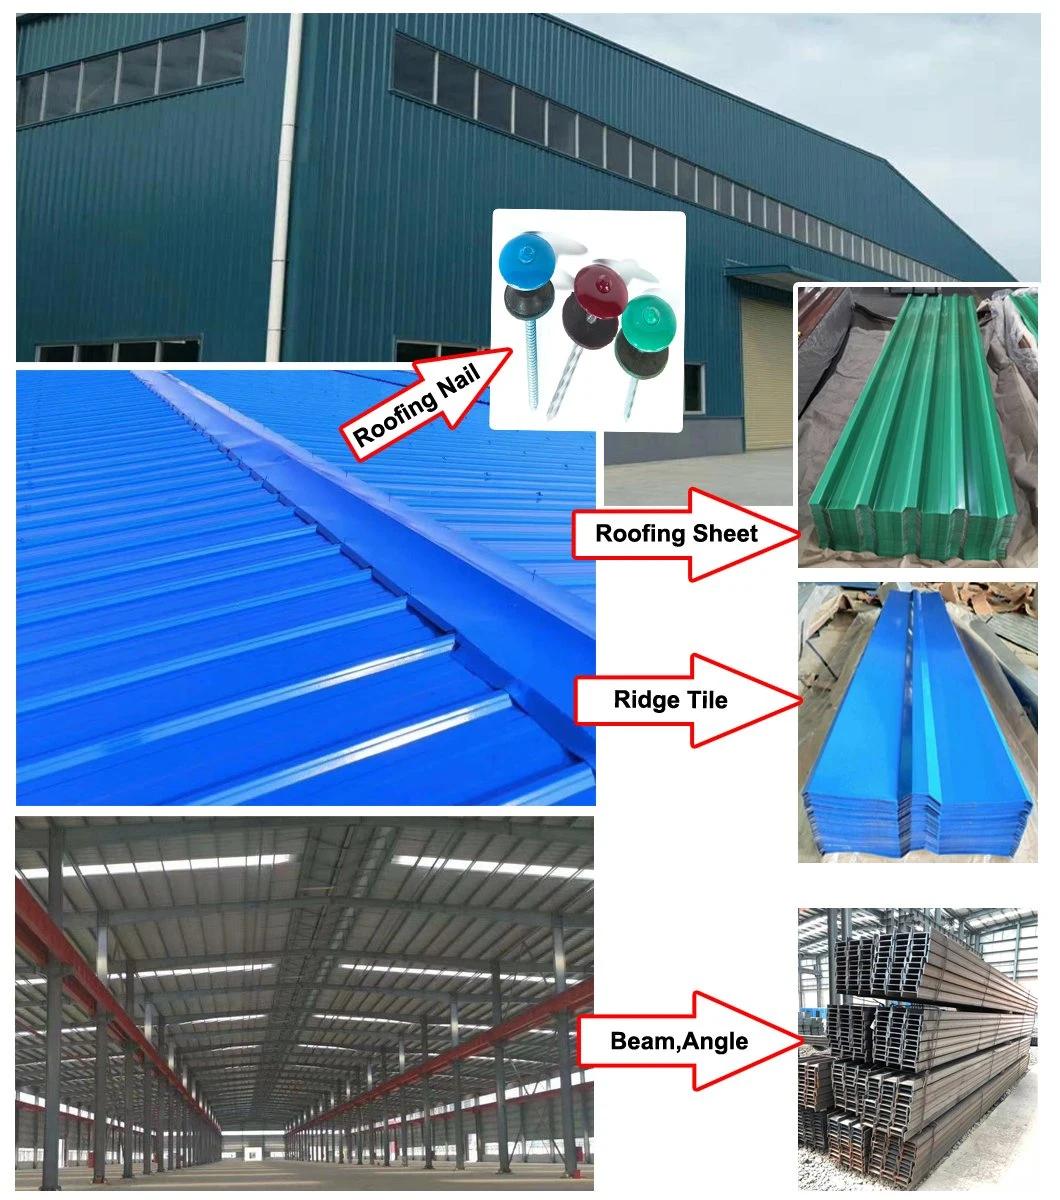 PPGI Galvanized Prepainted Color Coated Corrugated Steel Roofing Sheet